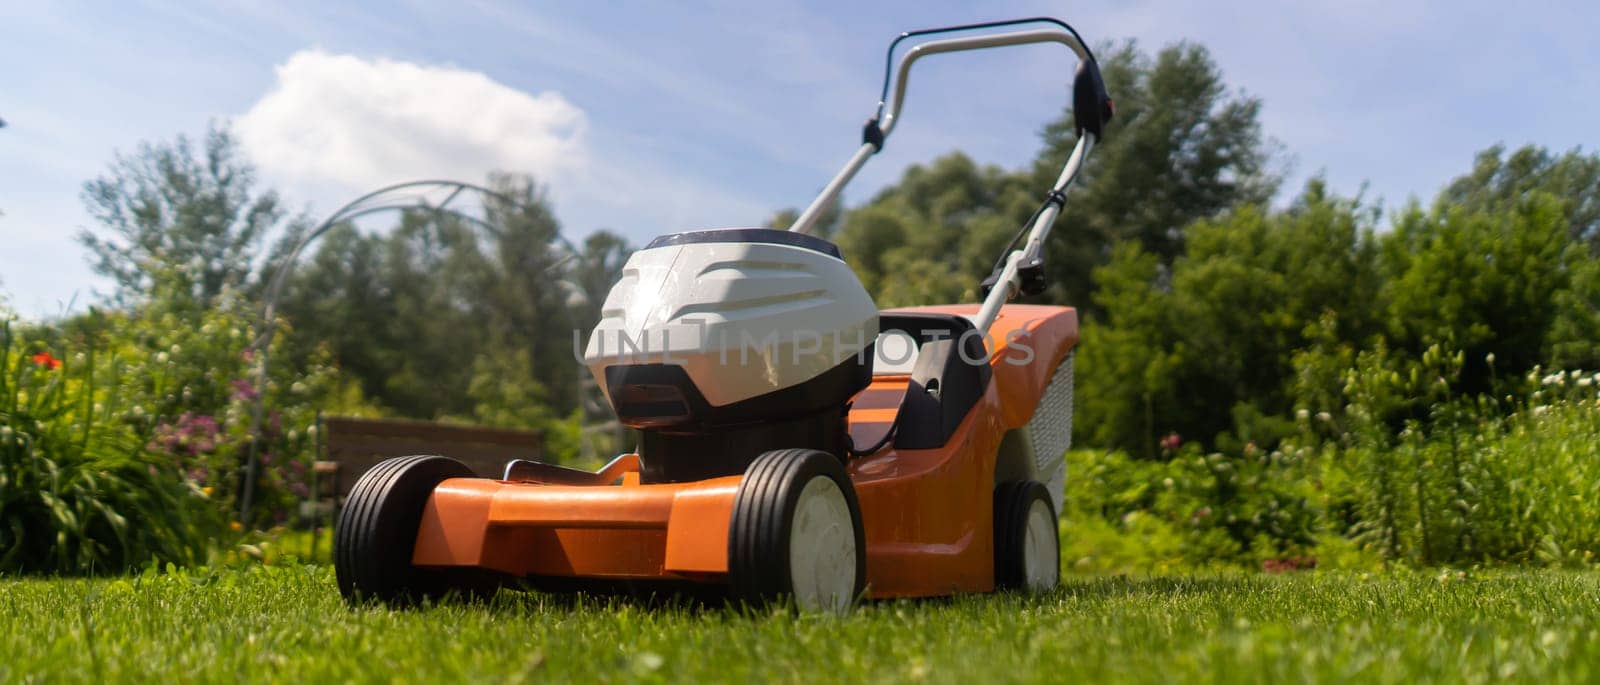 A lawn mower is outside at the beautiful green floral backyard lawn. A lawnmower is cutting a lawn on a summer sunny day.